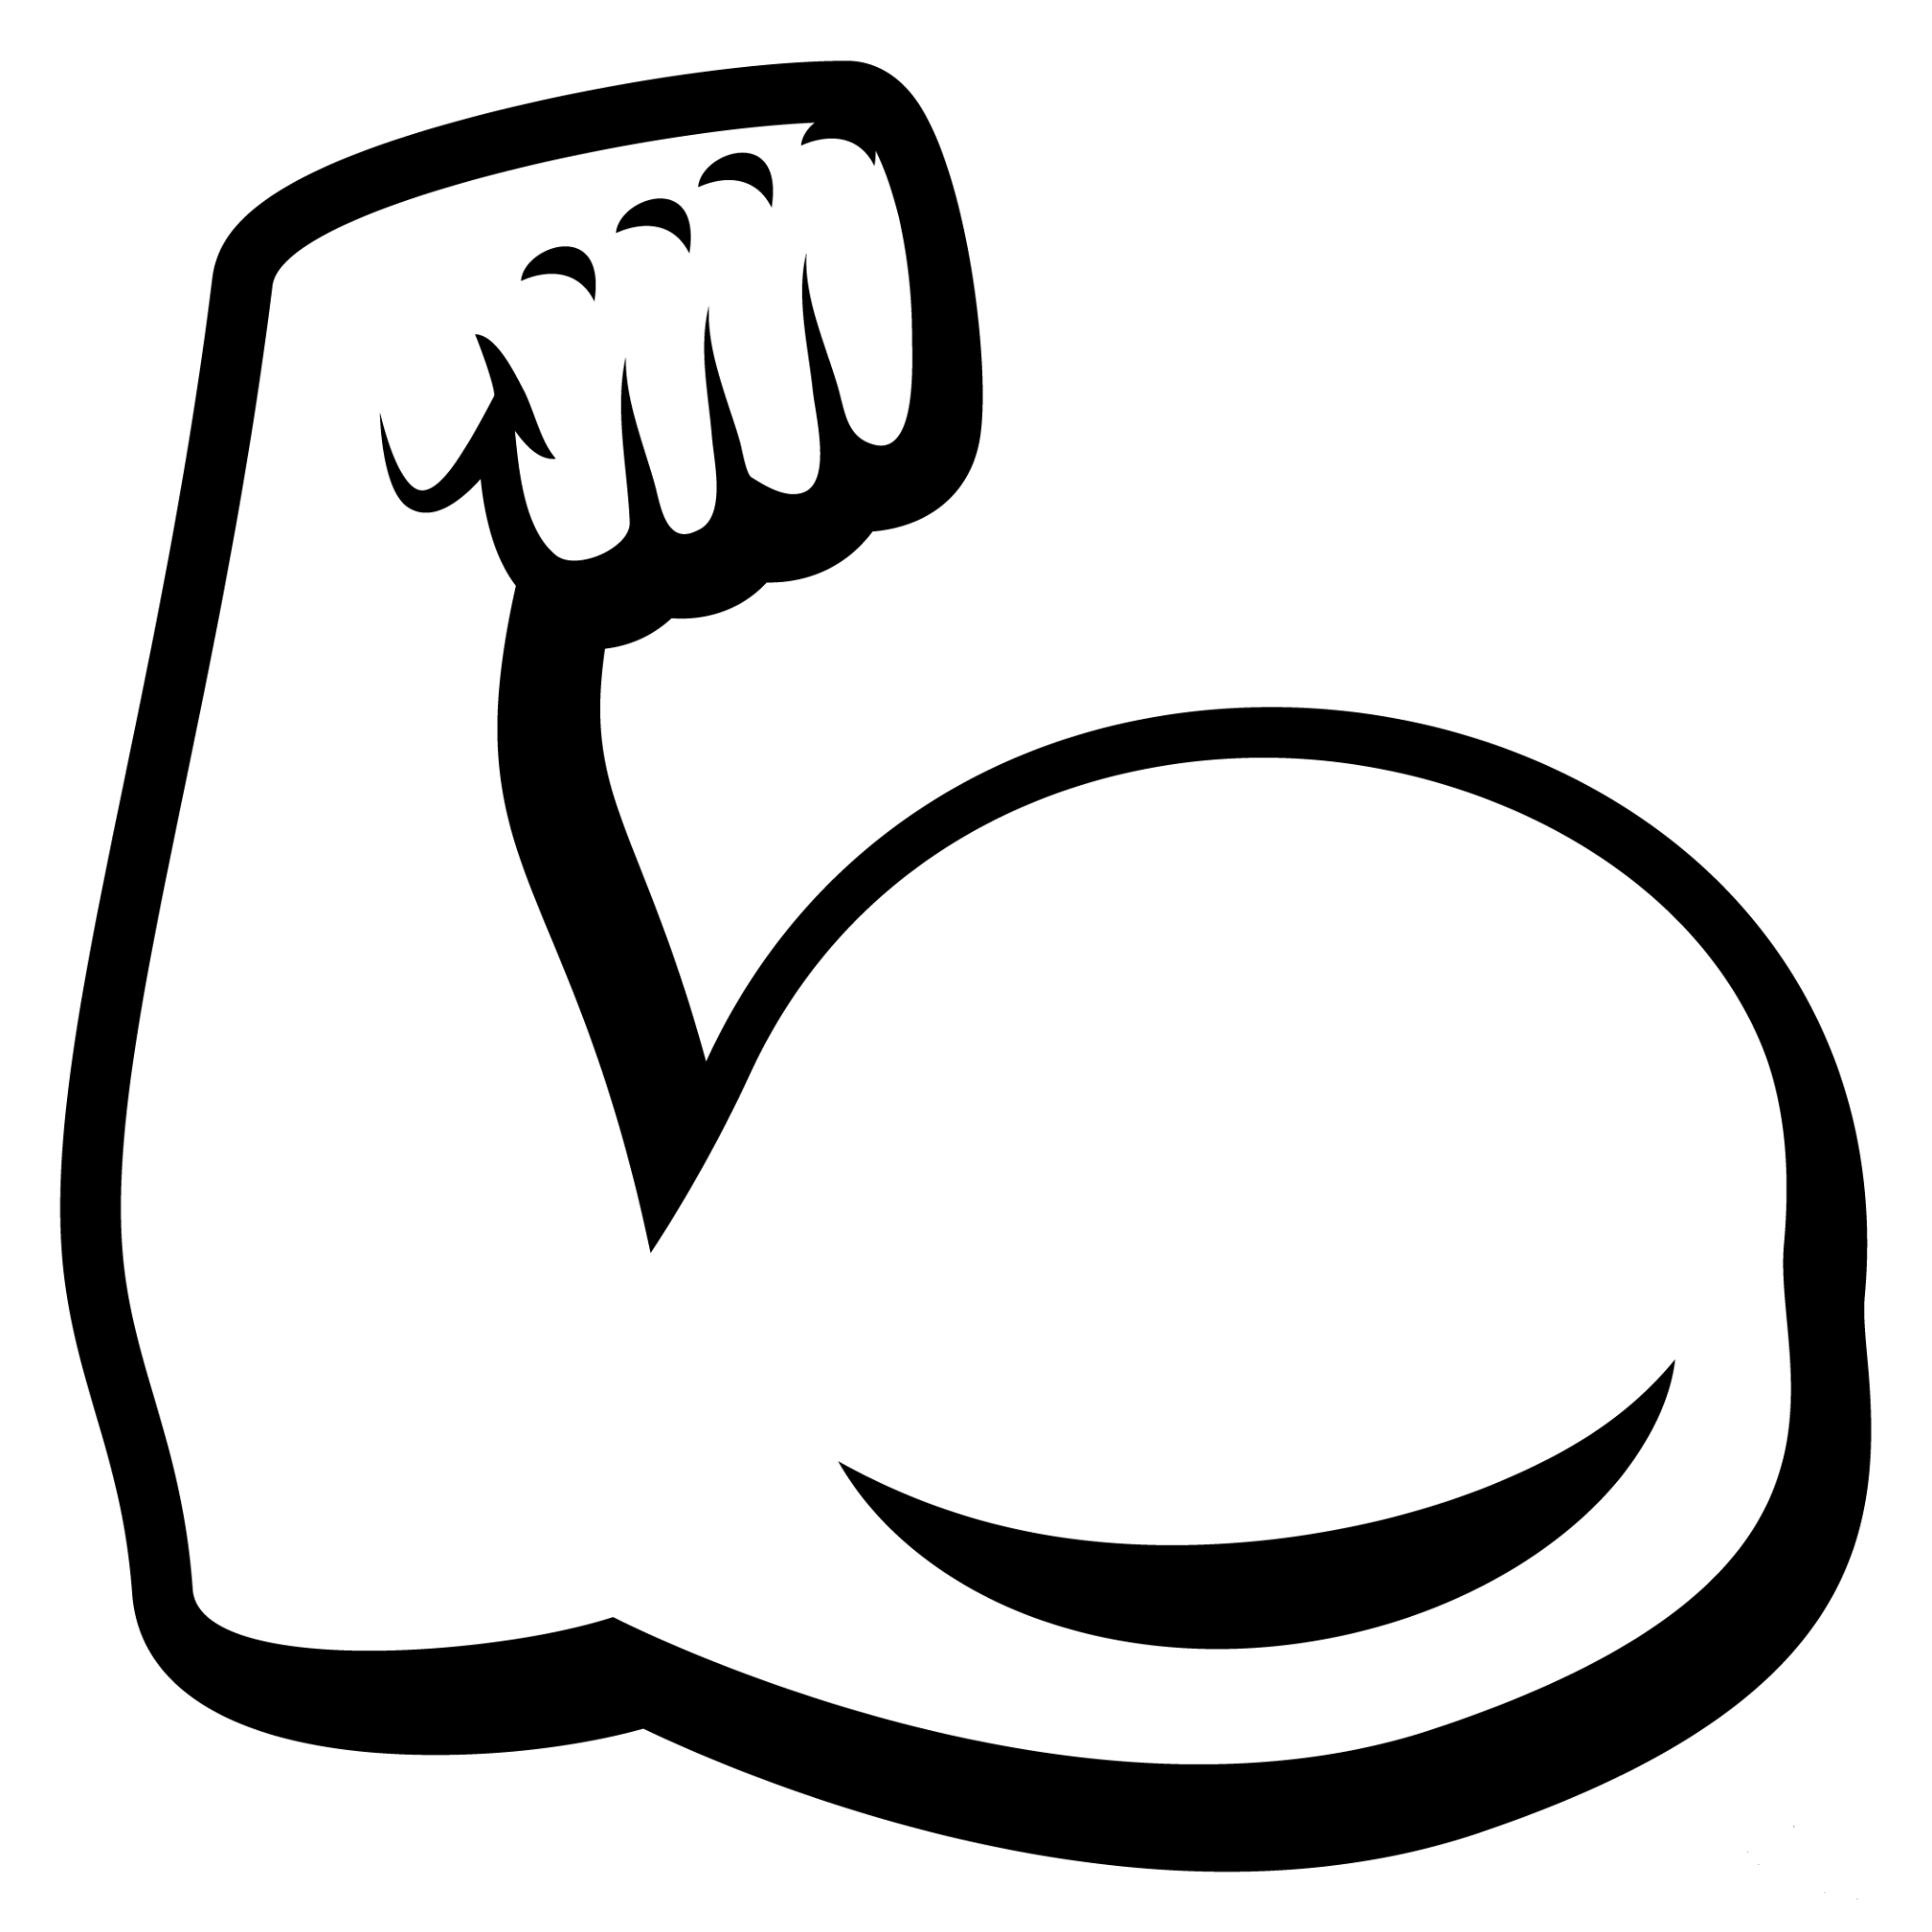 Flexed Biceps Emoji coloring page - ColouringPages